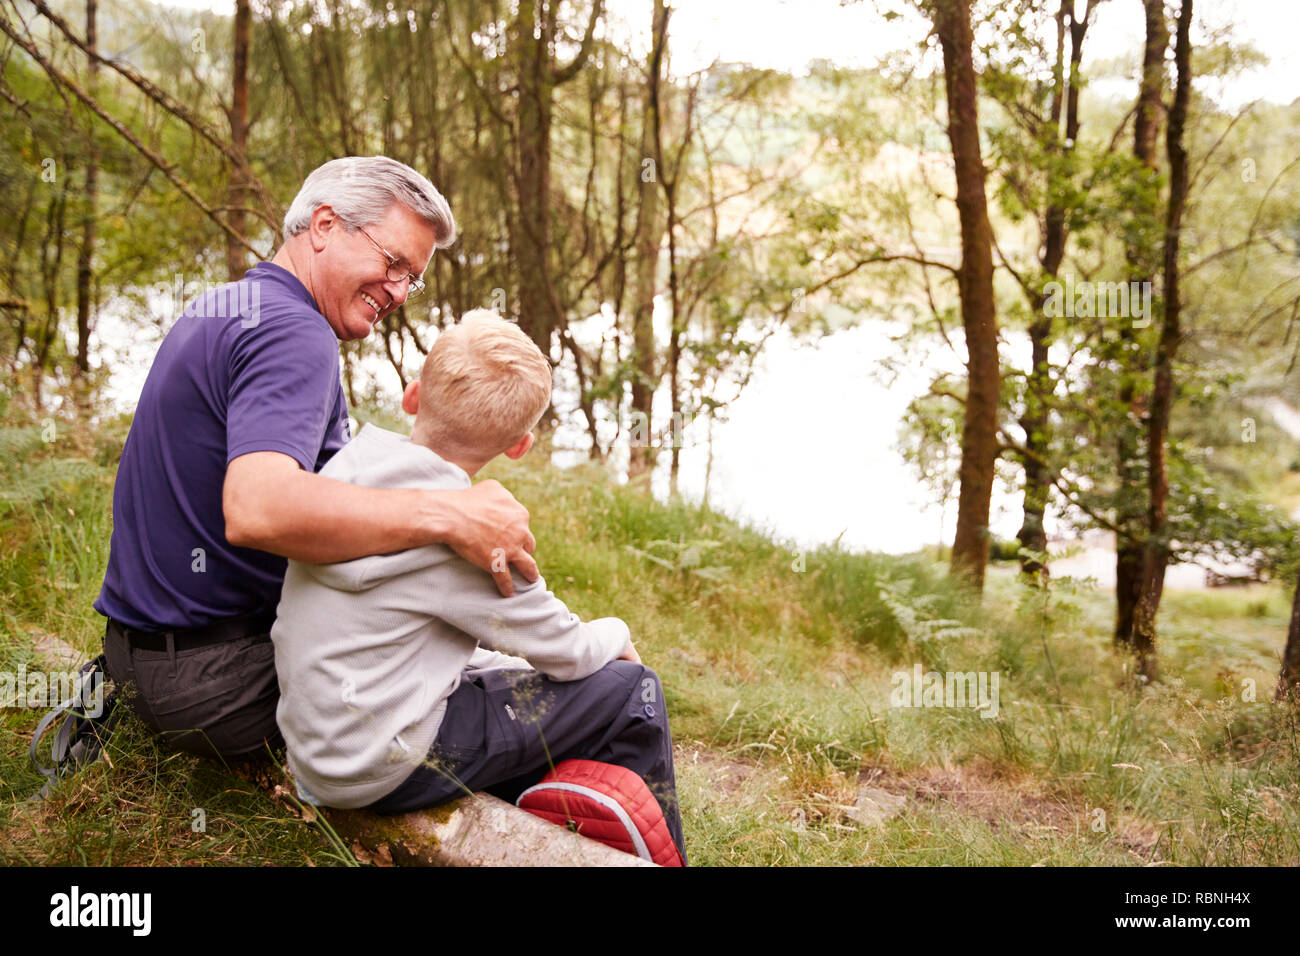 Grandfather and grandson on a hike sitting on a fallen tree in a forest, looking at each other, back view Stock Photo